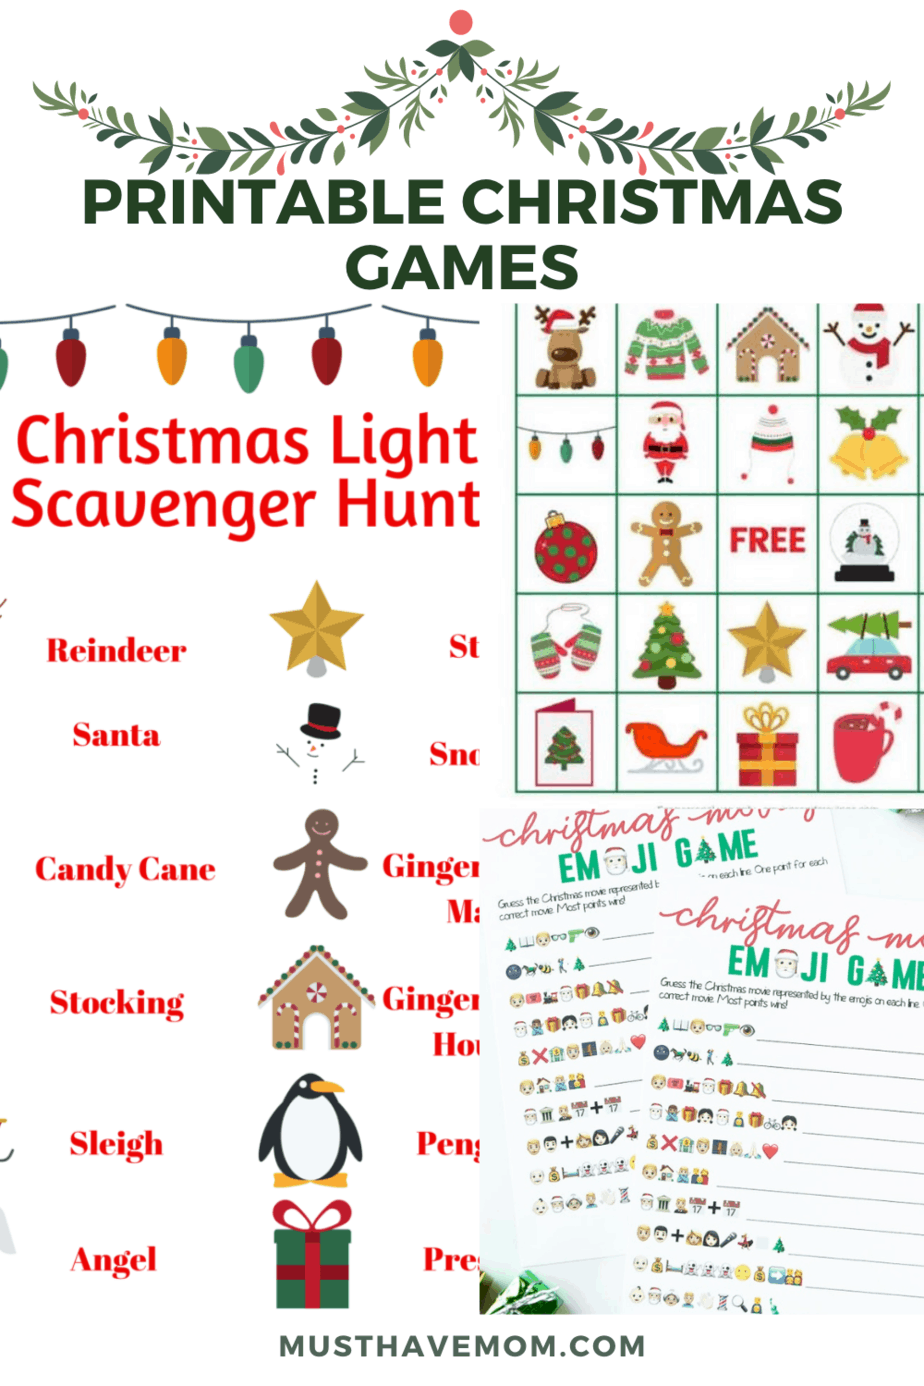 Free Printable Christmas Games. Perfect for a group activity or even just something to do at home with your family, these printable Christmas games are so much fun. #MustHaveMom #Christmas #printable #ChristmasGames #games